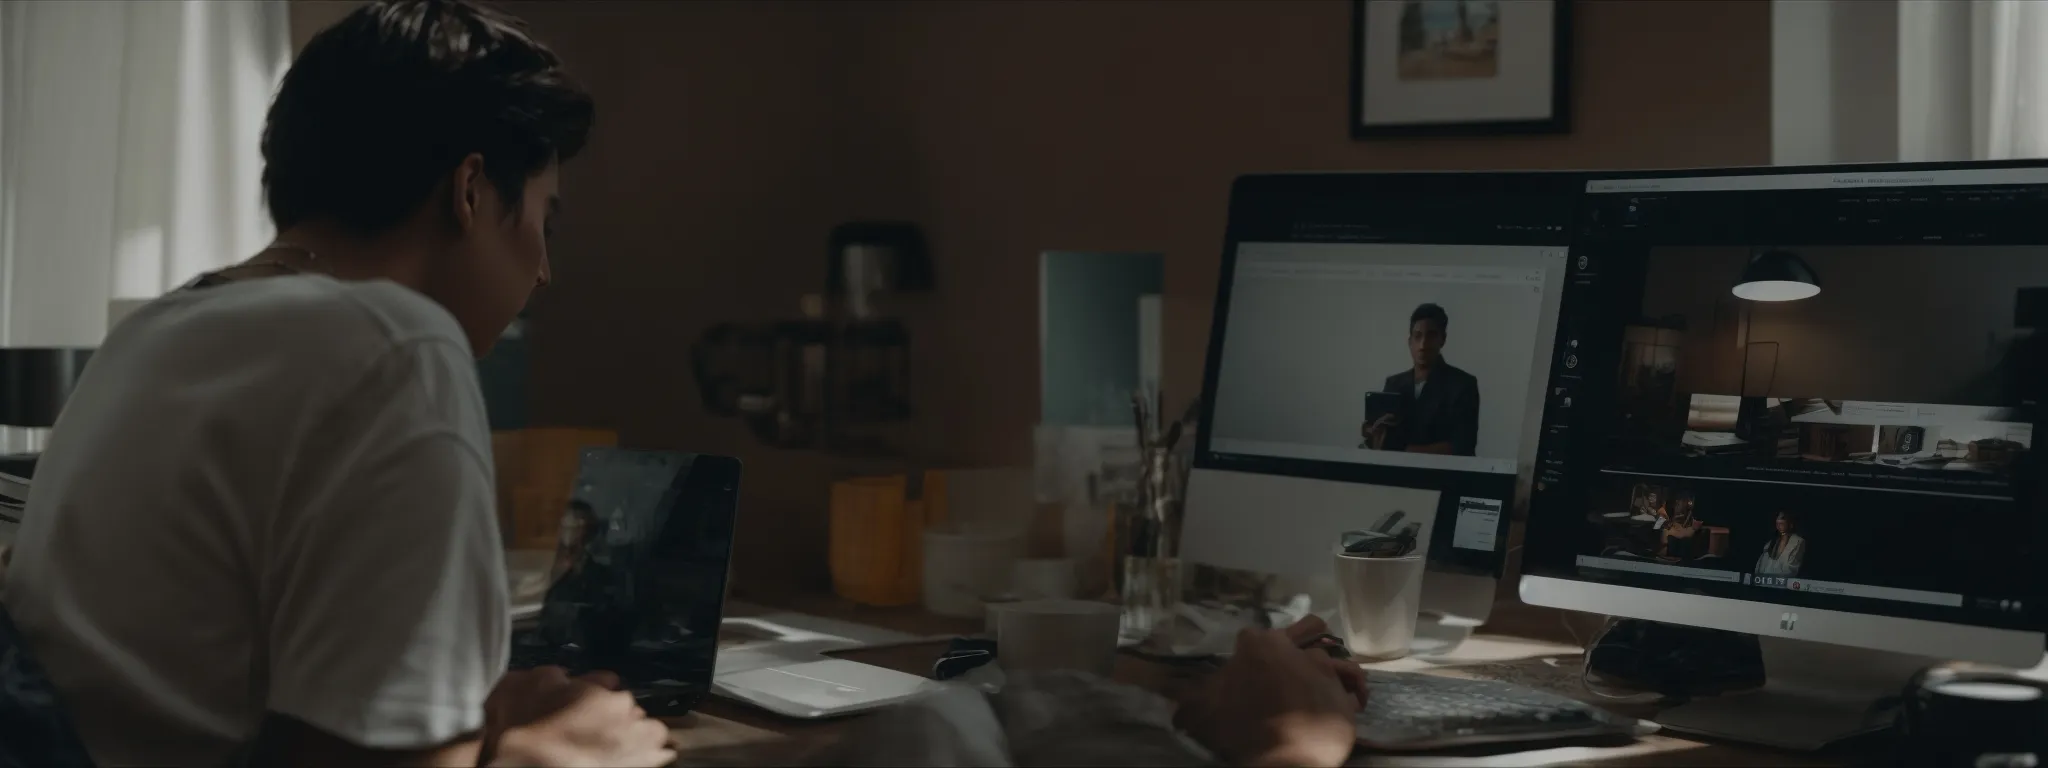 a person using a laptop with wordpress on the screen in a well-lit home office.